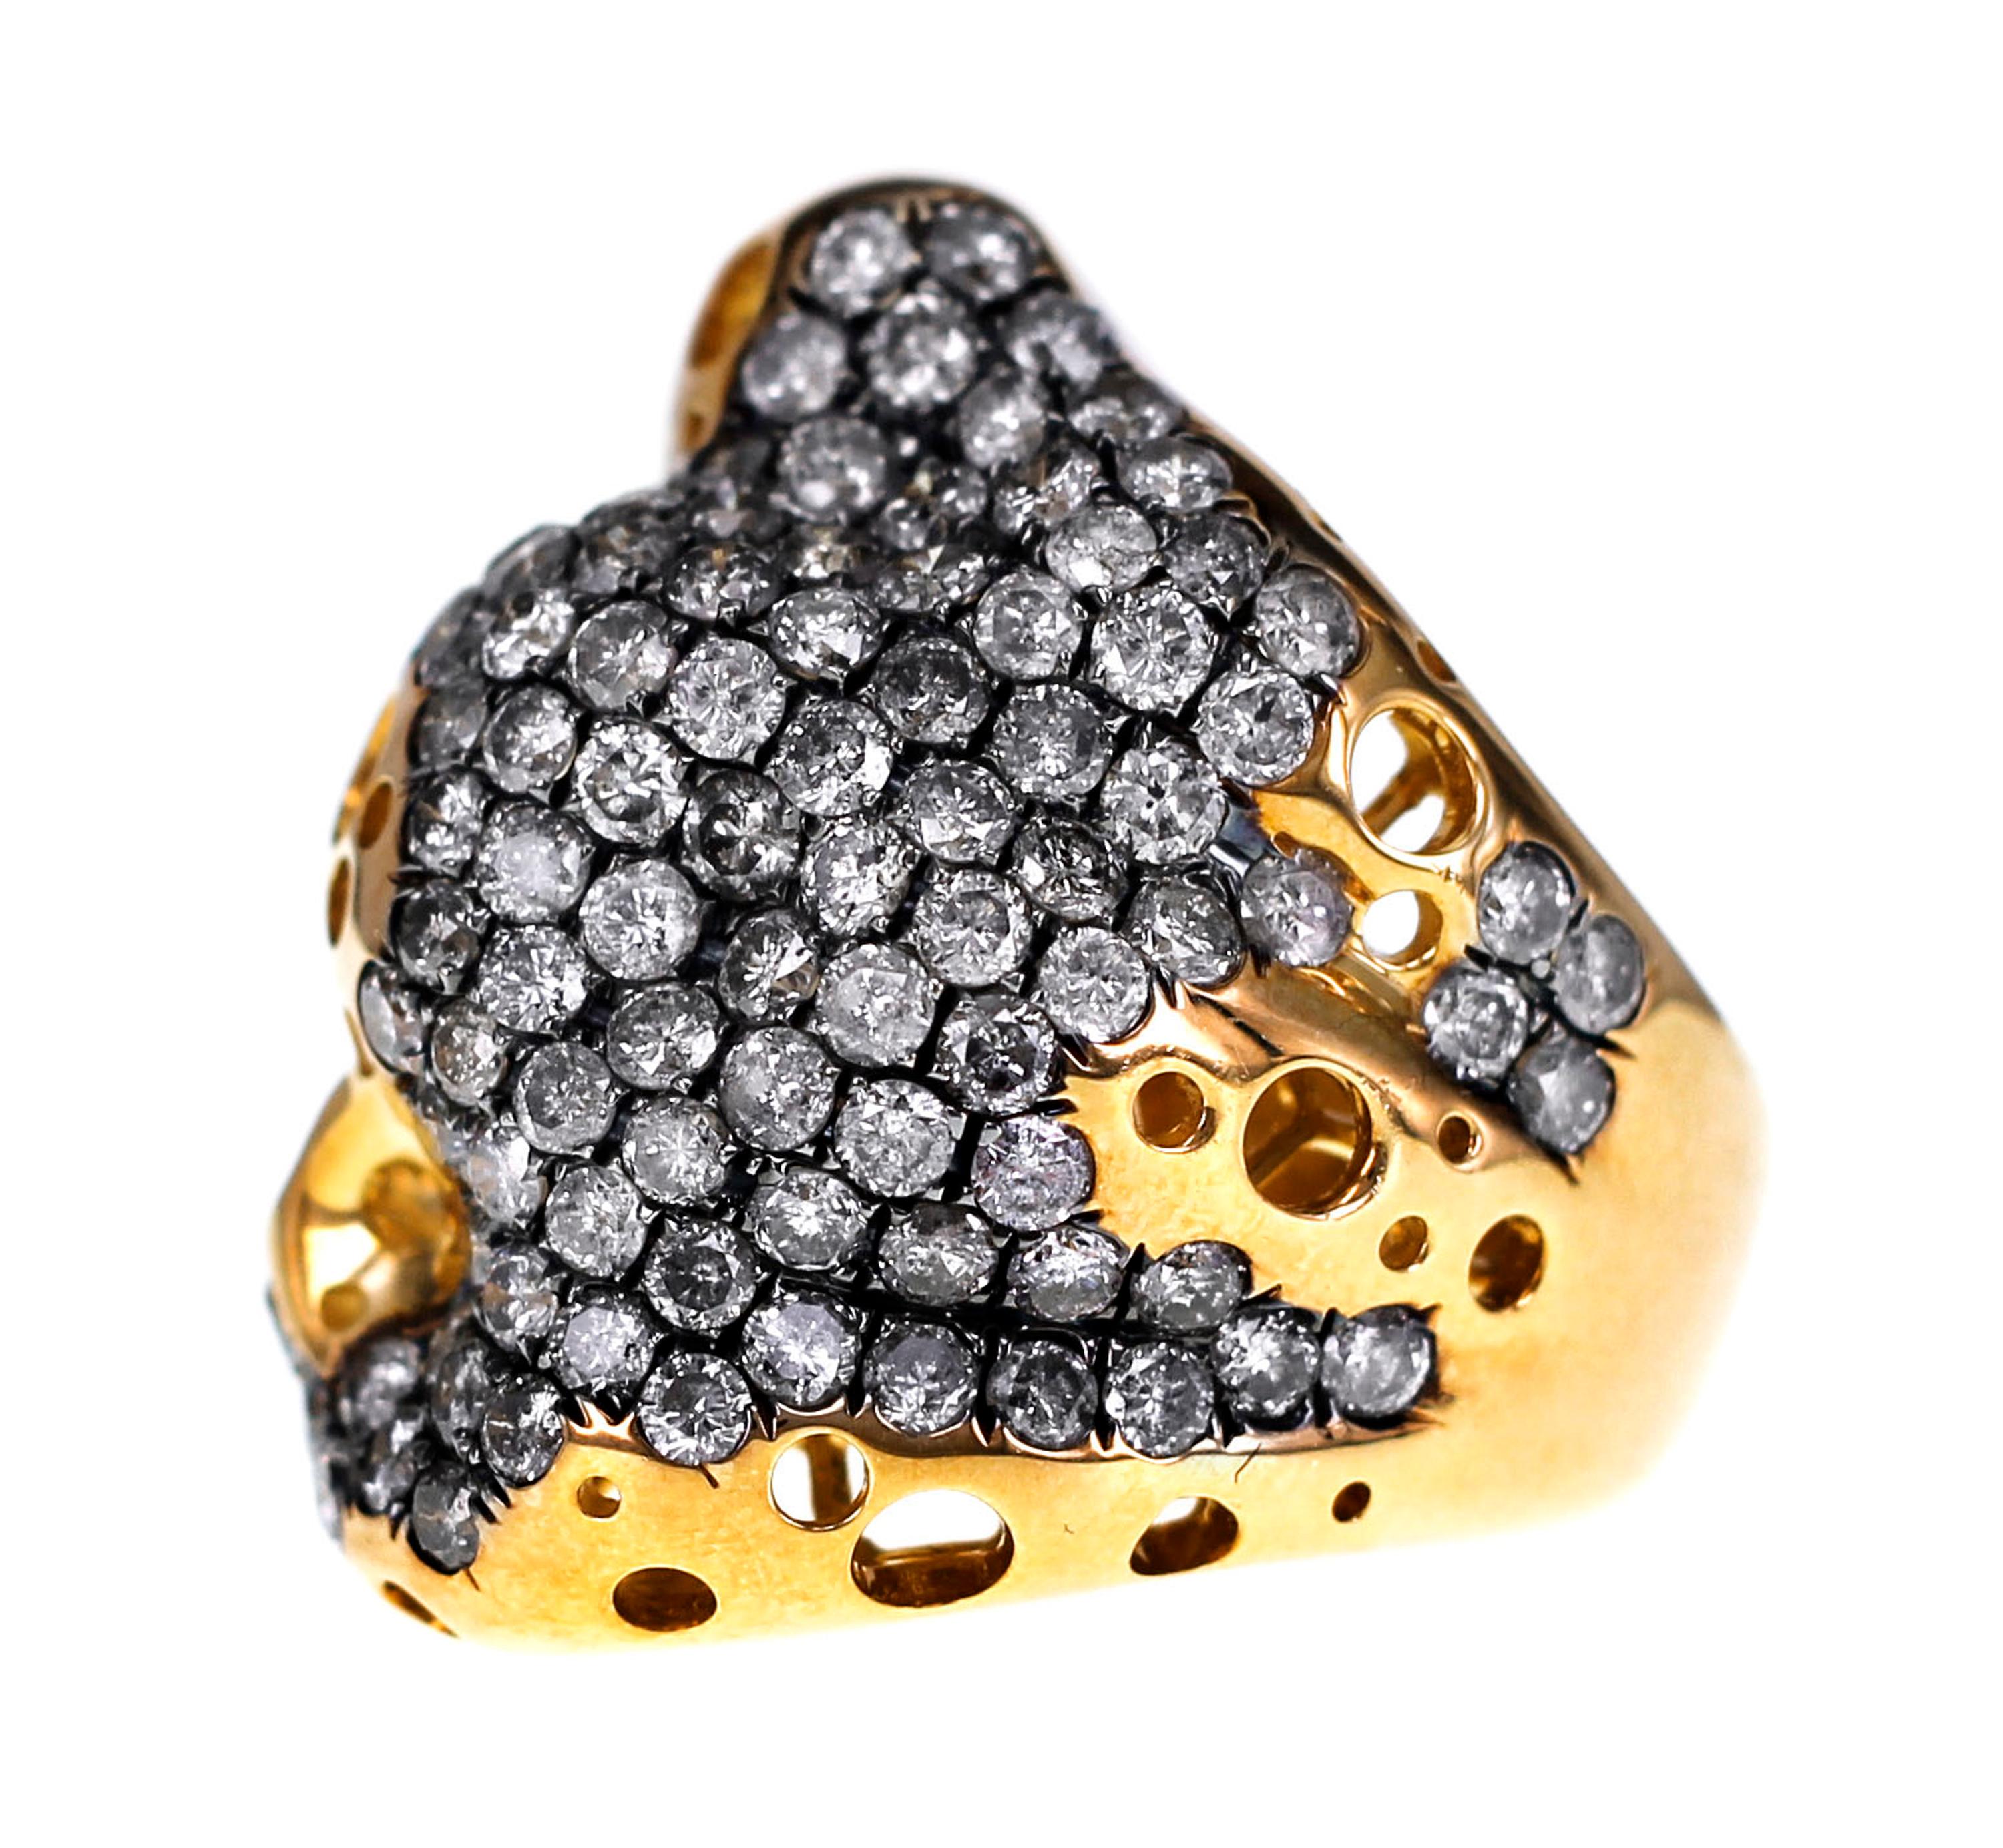 Made specially keeping in mind the recent trend of Gold heavy jewelry, the ring has been made with 'Malpani' vision. The gold heavy ring is set with 4.56 carat of natural fancy gray diamonds. The ring instantly catches your attention because of the